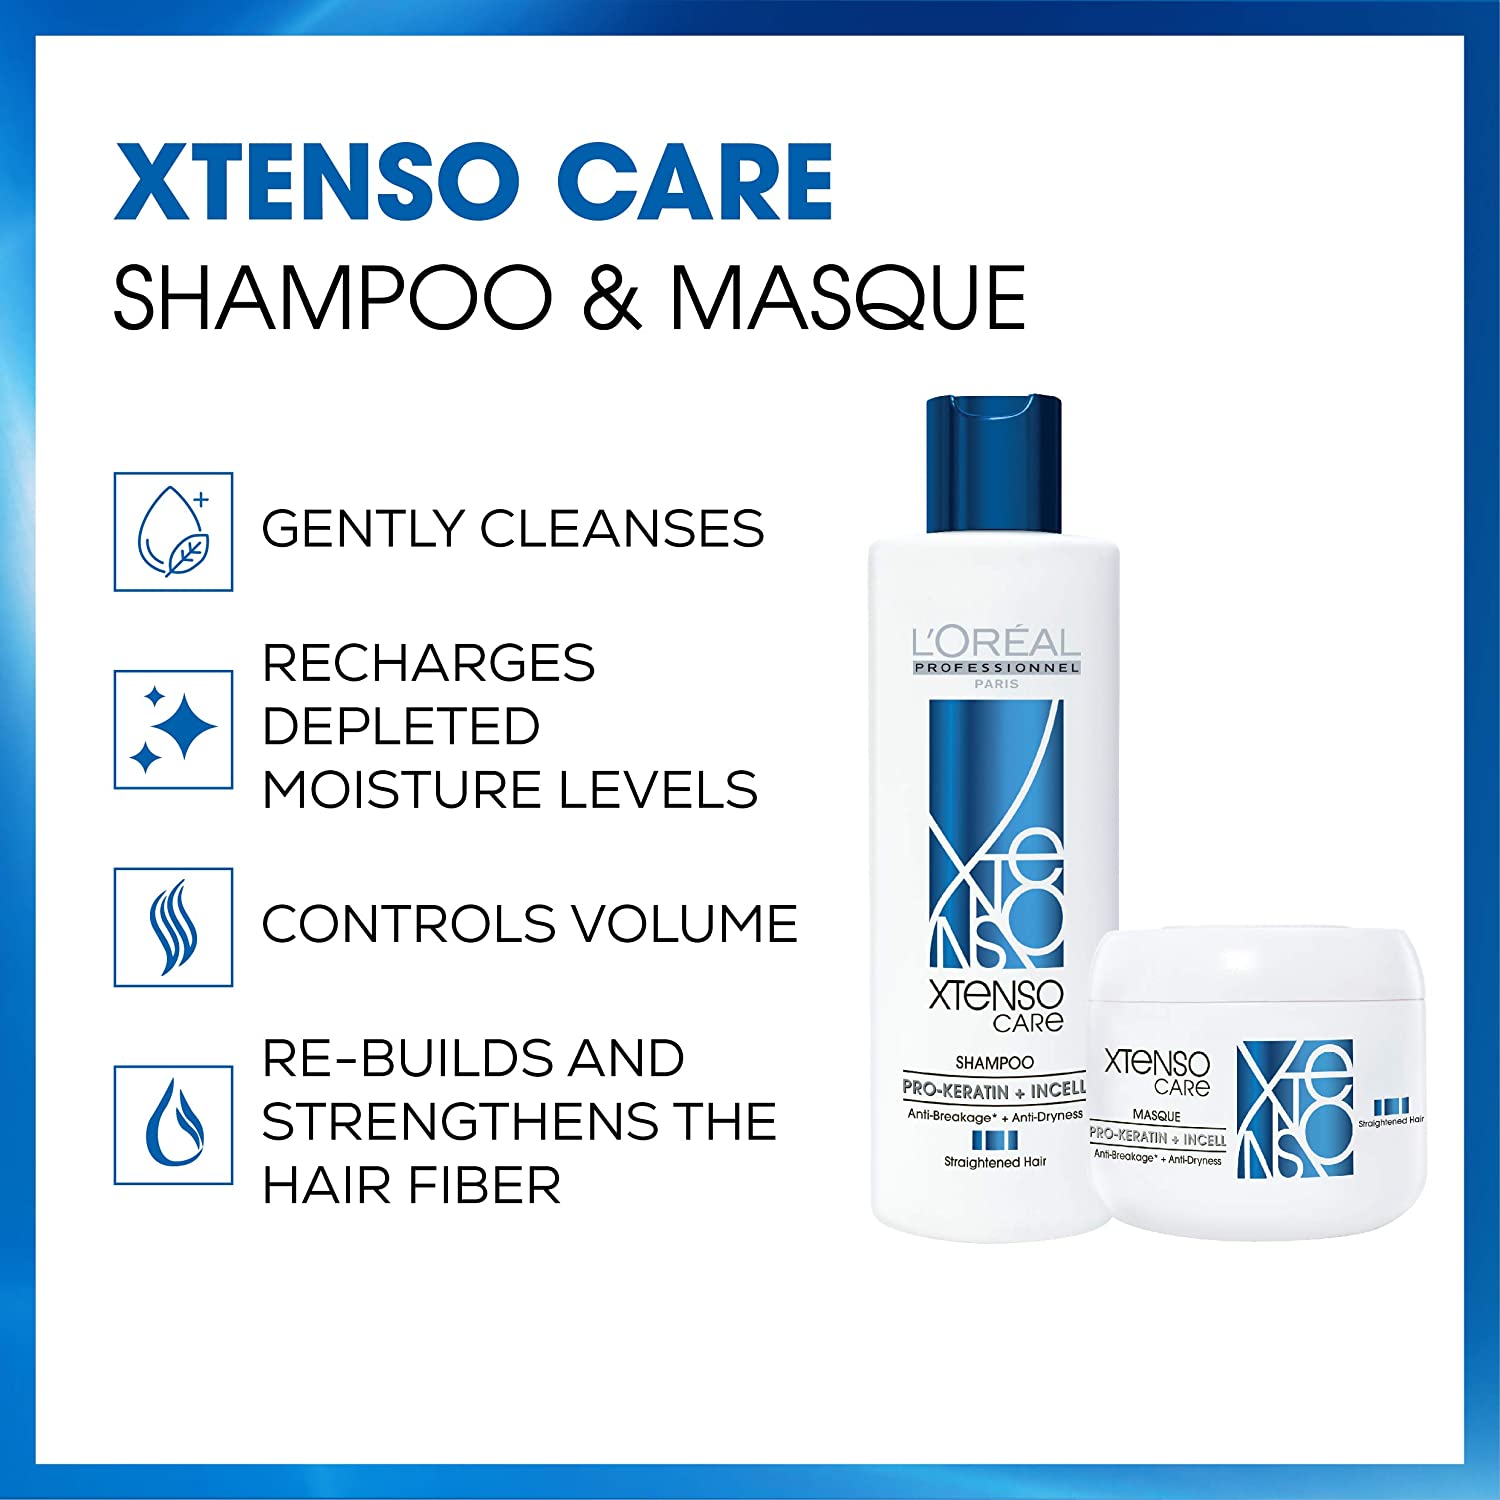 LOreal Professionnel XTenso Care Hair Masque Review  Khushi Hamesha